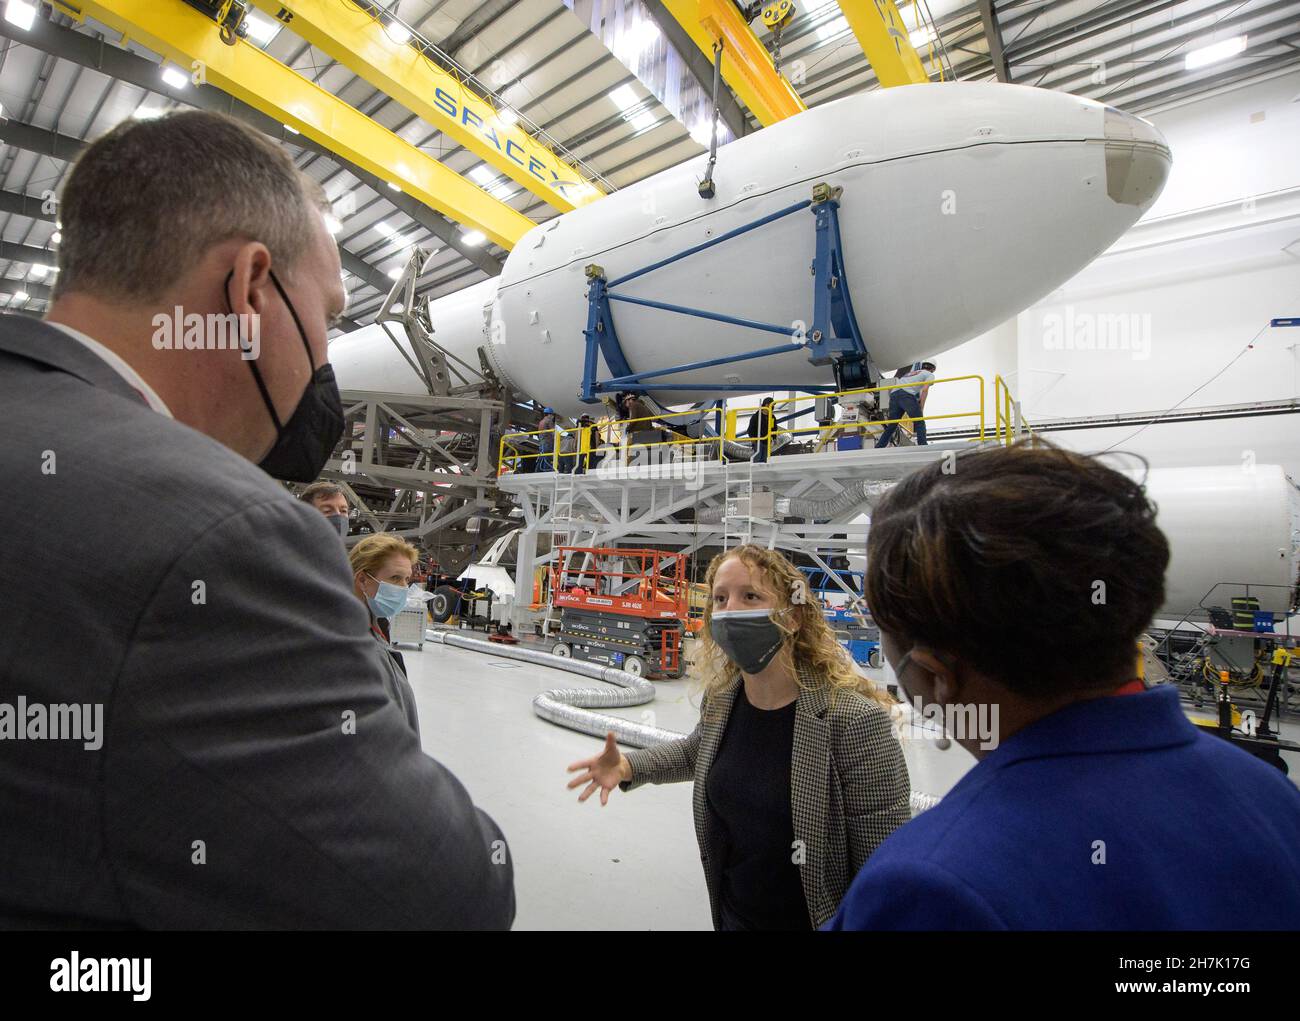 NASA Associate Administrator for the Science Mission Directorate Thomas Zurbuchen, left, and other NASA leadership listen as Julianna Scheiman, director for civil satellite missions at SpaceX, center, gives a tour of the hanger where the Falcon 9 rocket and DART spacecraft are being readied for launch, Monday, Nov. 22, 2021, at Vandenberg Space Force Base in California. DART is the world's first full-scale planetary defense test, demonstrating one method of asteroid deflection technology. The mission was built and is managed by Johns Hopkins APL for NASA's Planetary Defense Coordination Office Stock Photo